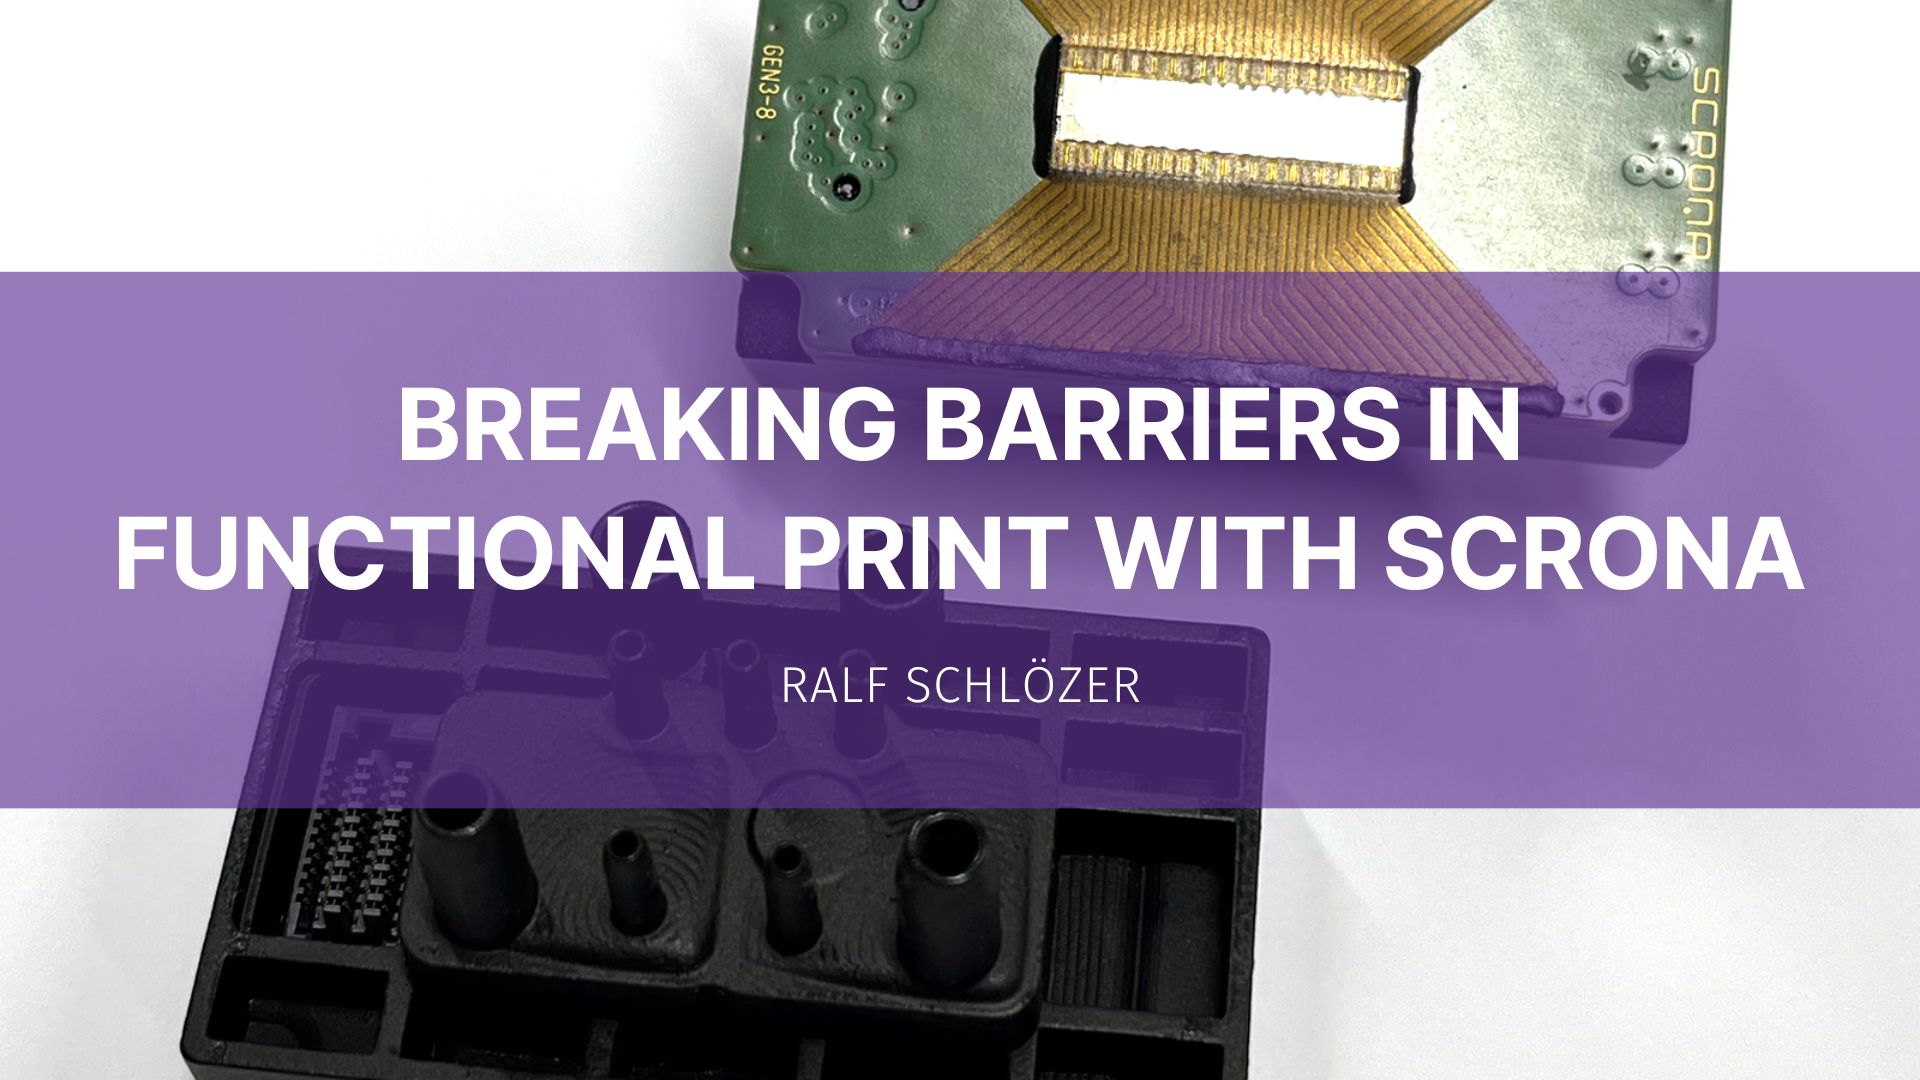 Featured image for “Breaking barriers in functional print with Scrona”